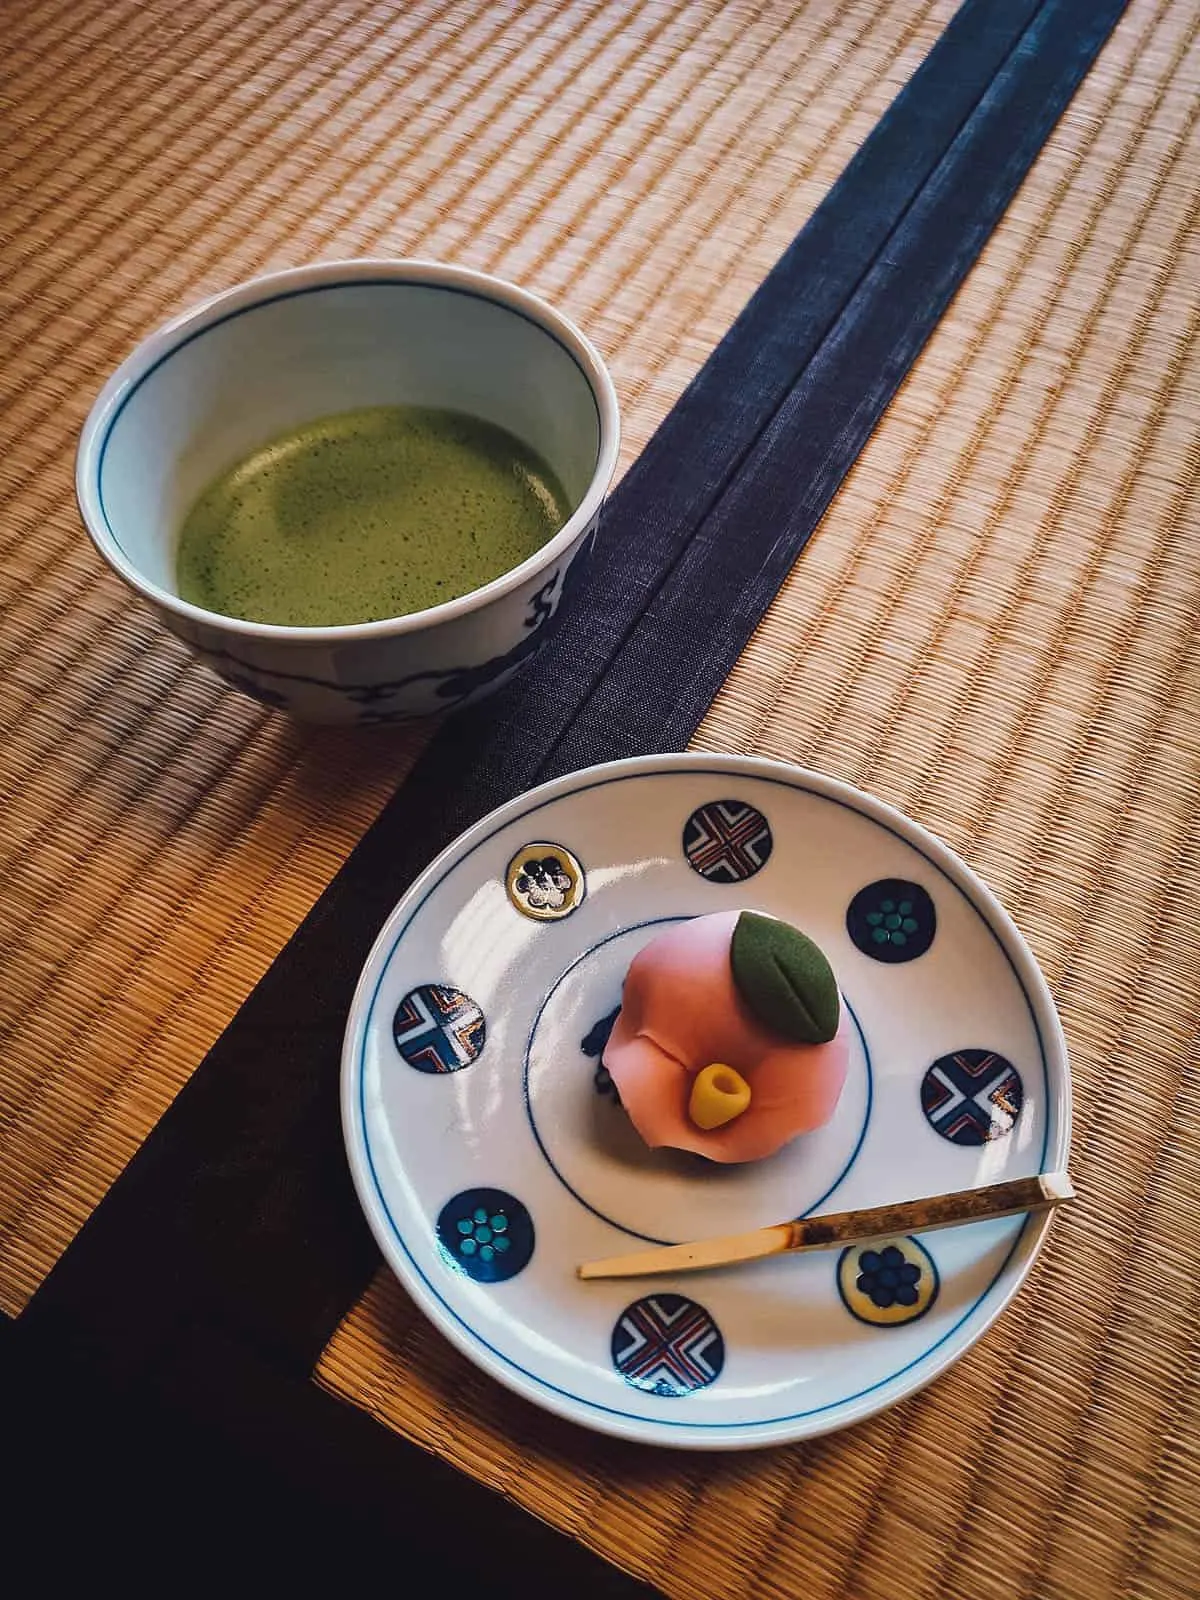 Matcha green tea with wagashi, a traditional Japanese confection